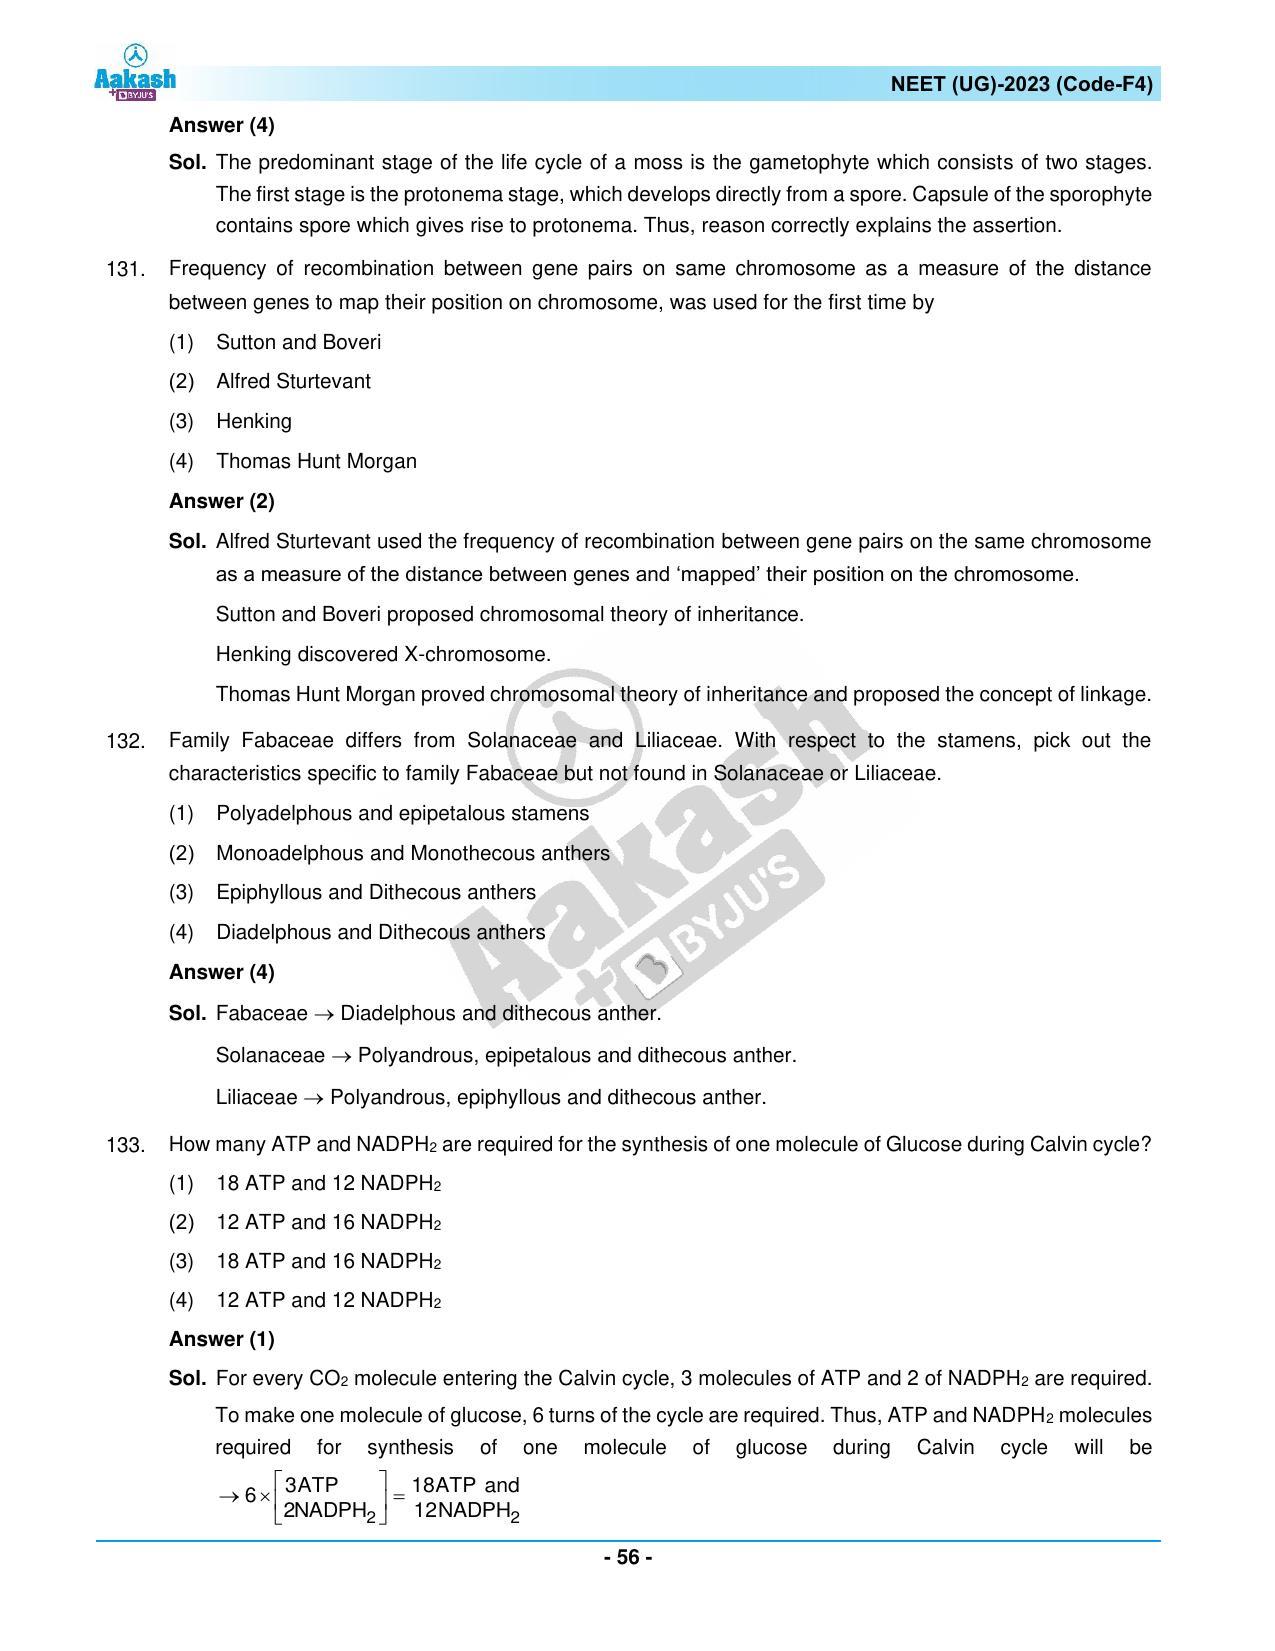 NEET 2023 Question Paper F4 - Page 56